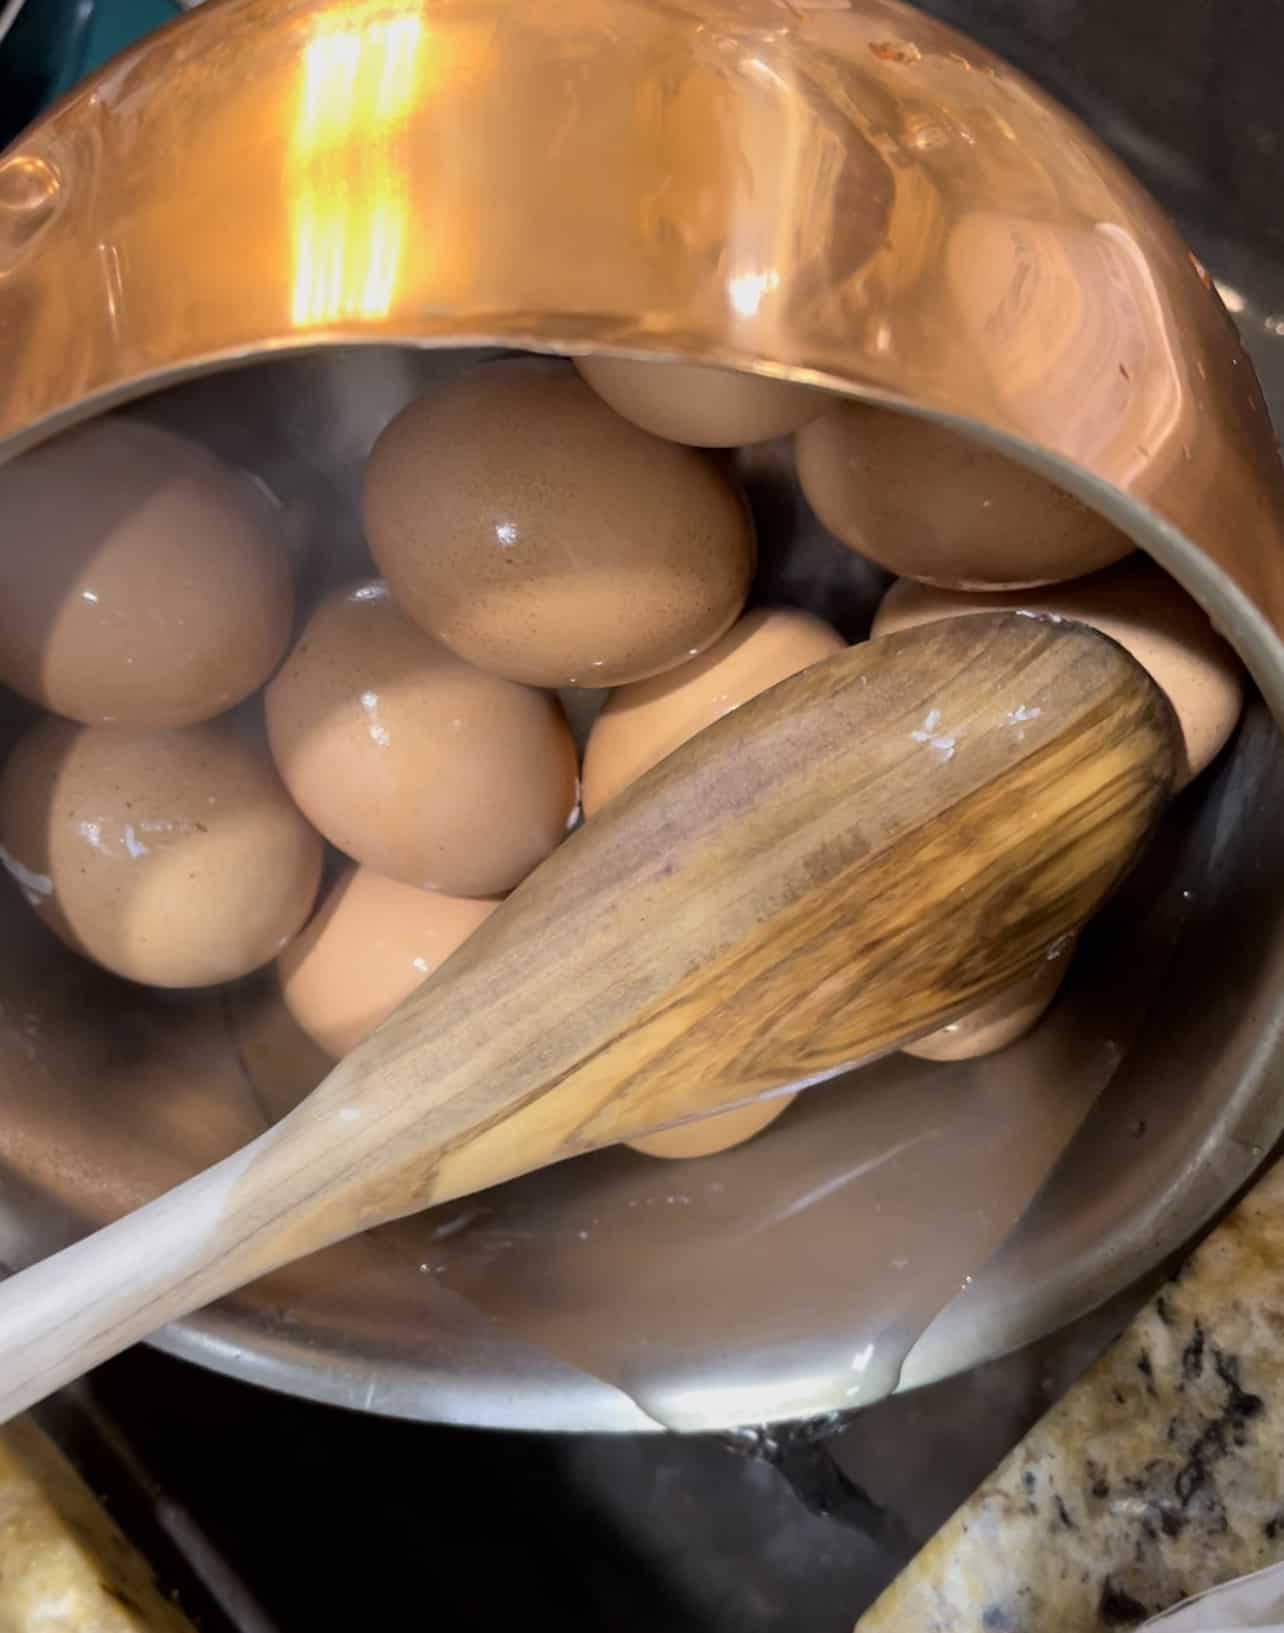 draining boiling water from boiled eggs